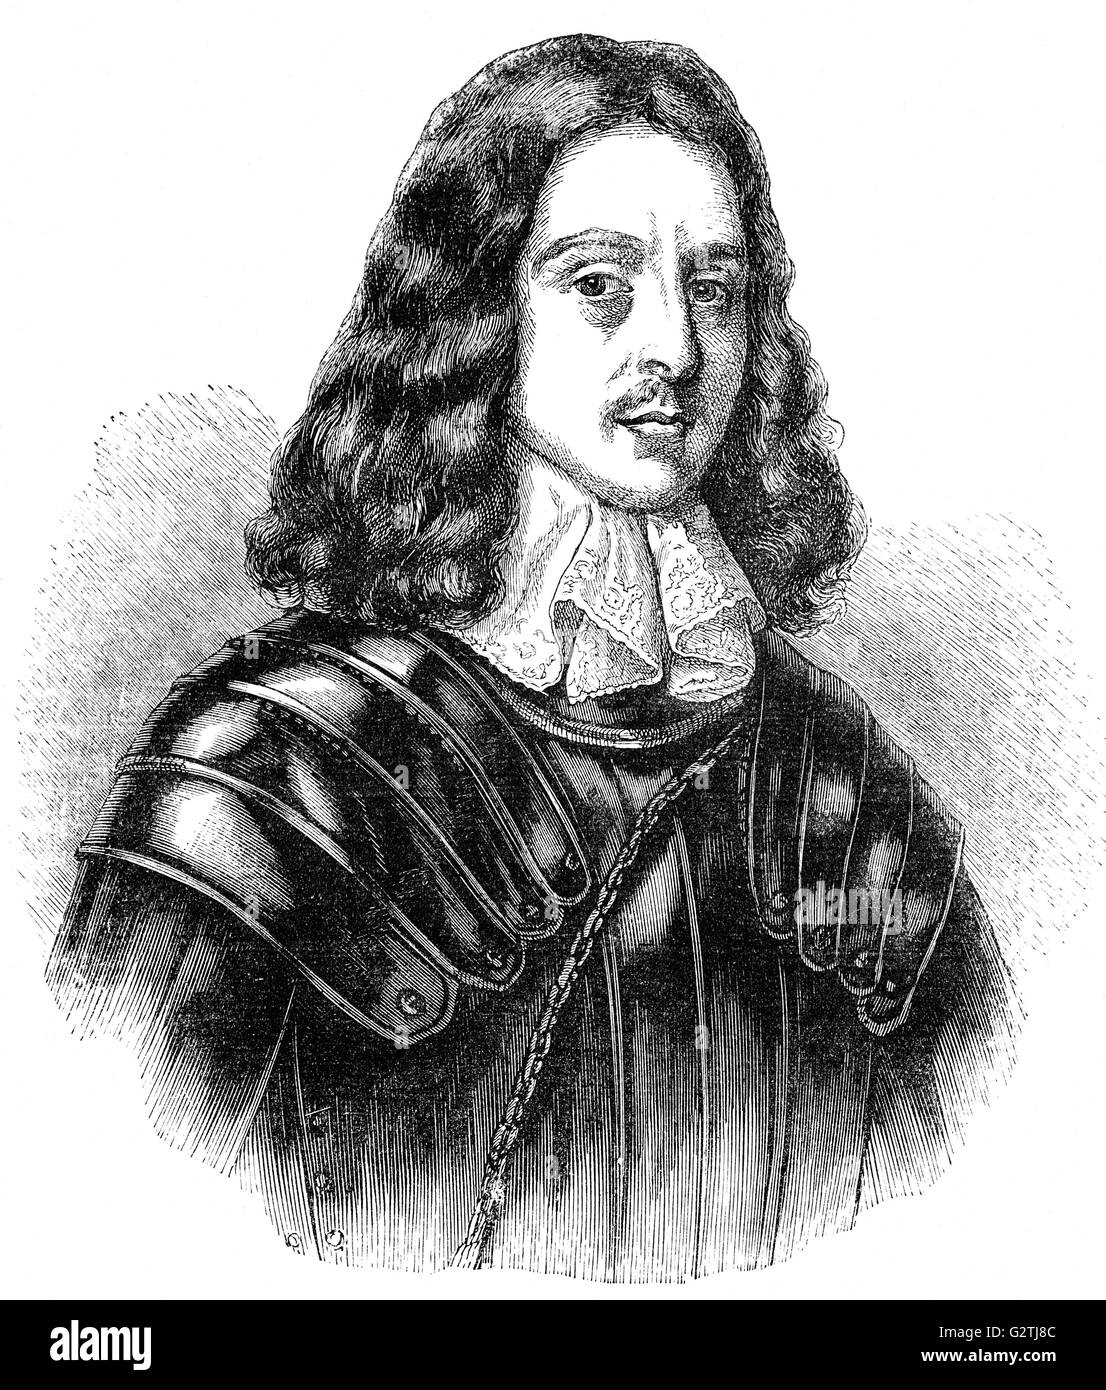 Sir Thomas Fairfax, 3rd Lord Fairfax of Cameron,  nicknamed 'Black Tom' was a general and Parliamentary commander-in-chief during the English Civil War. Stock Photo